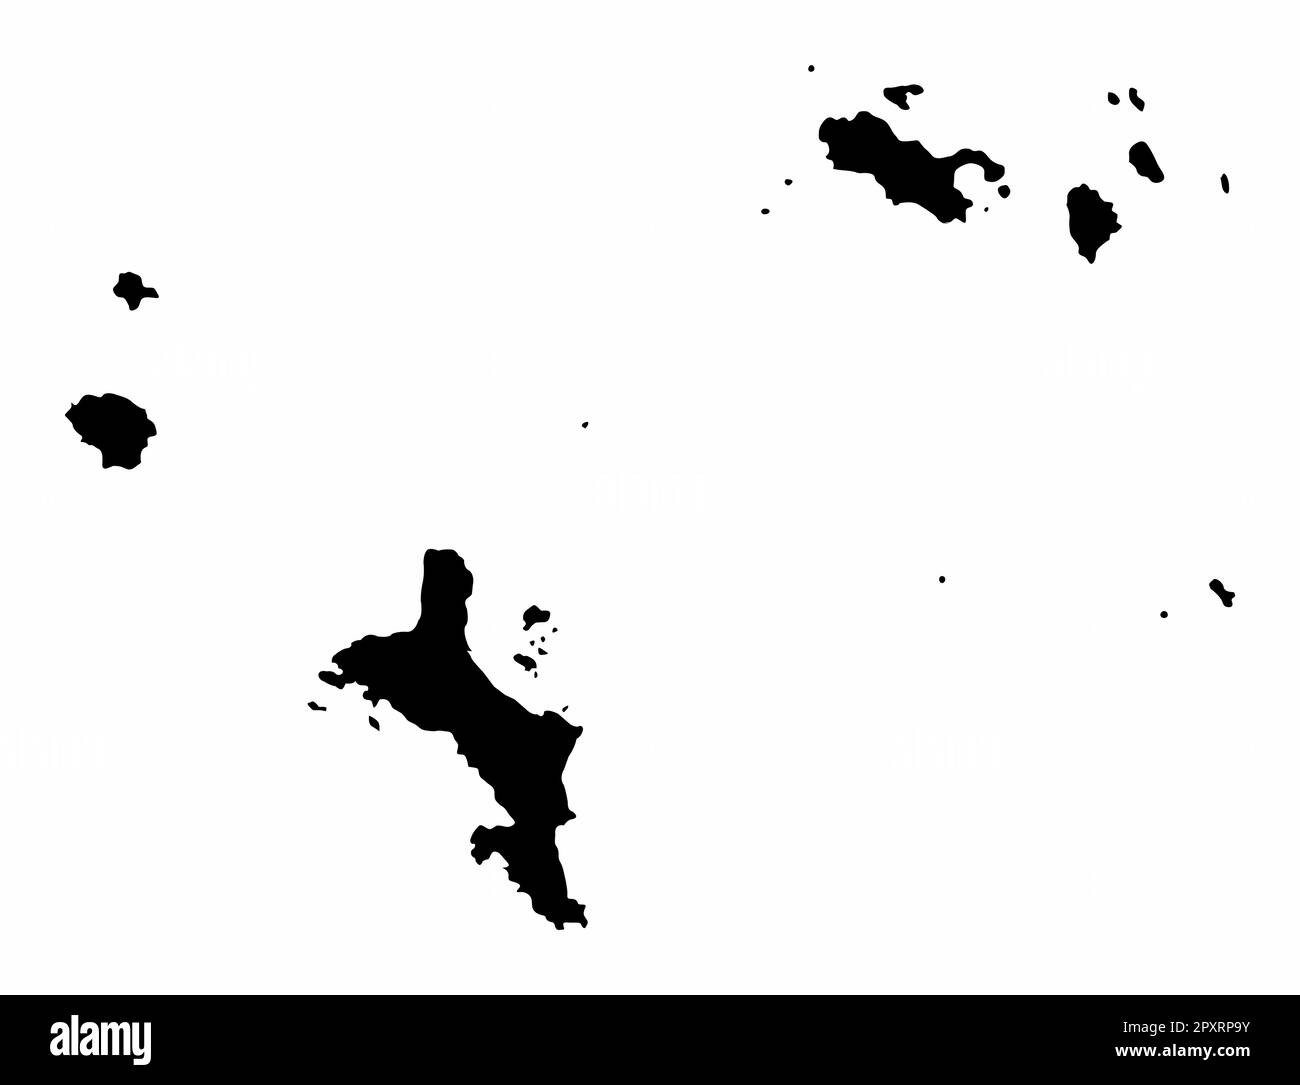 Seychelles map silhouette isolated on white background Stock Vector